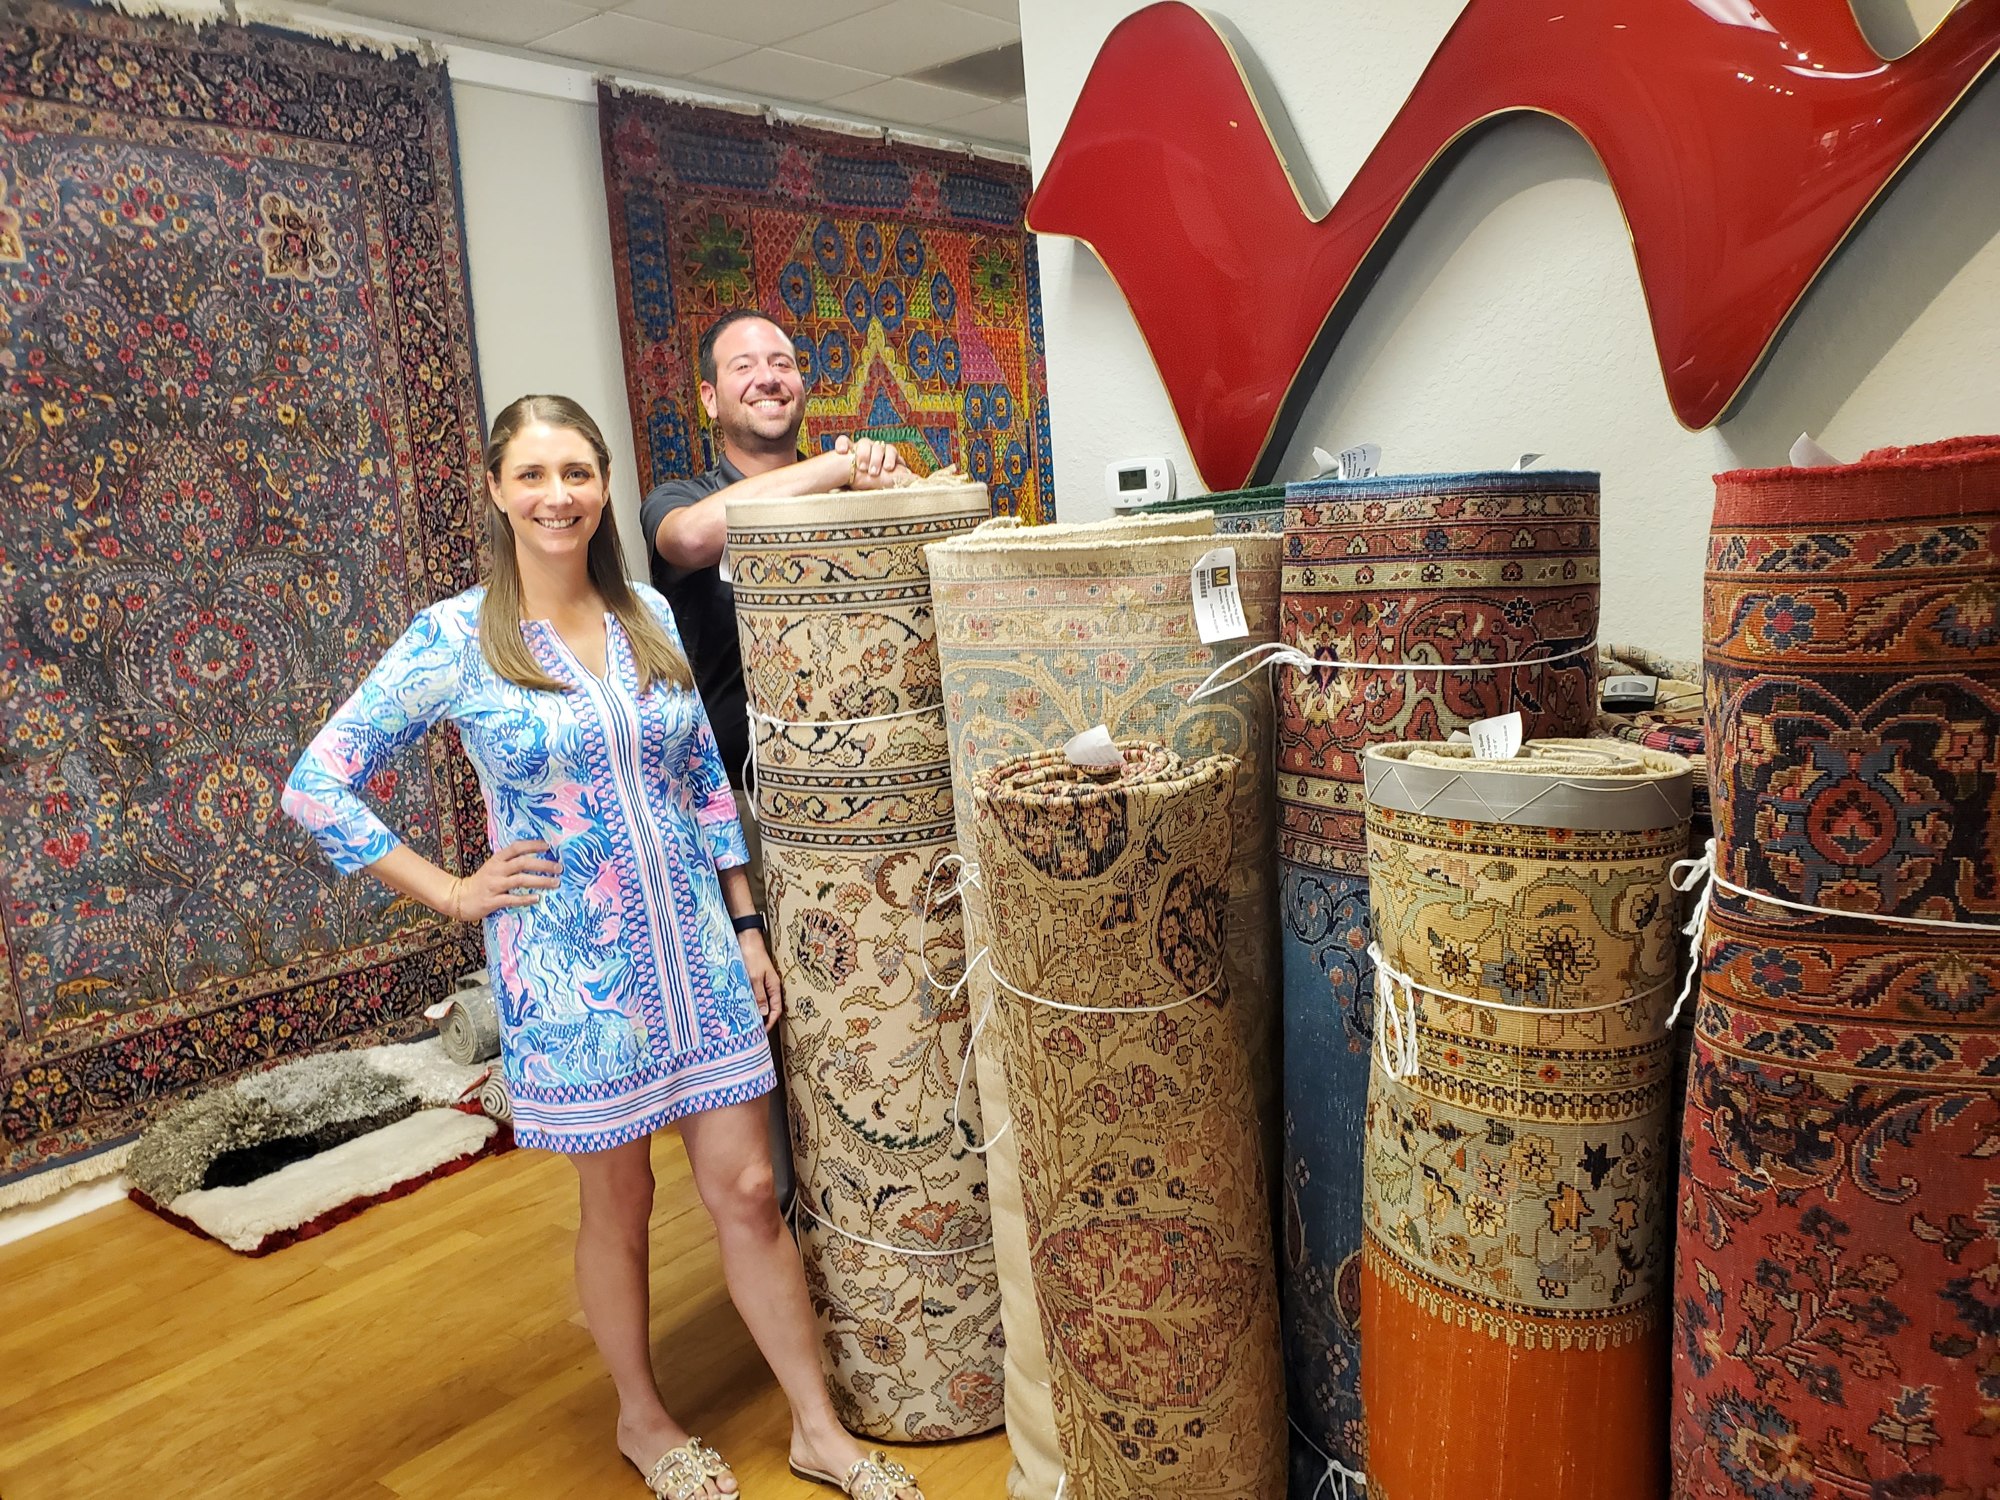 Michael Mussallem’s great-grandfather, Charles Mussallem, entered the rug business in Jacksonville in 1897.  (Photo by Drew Dixon)